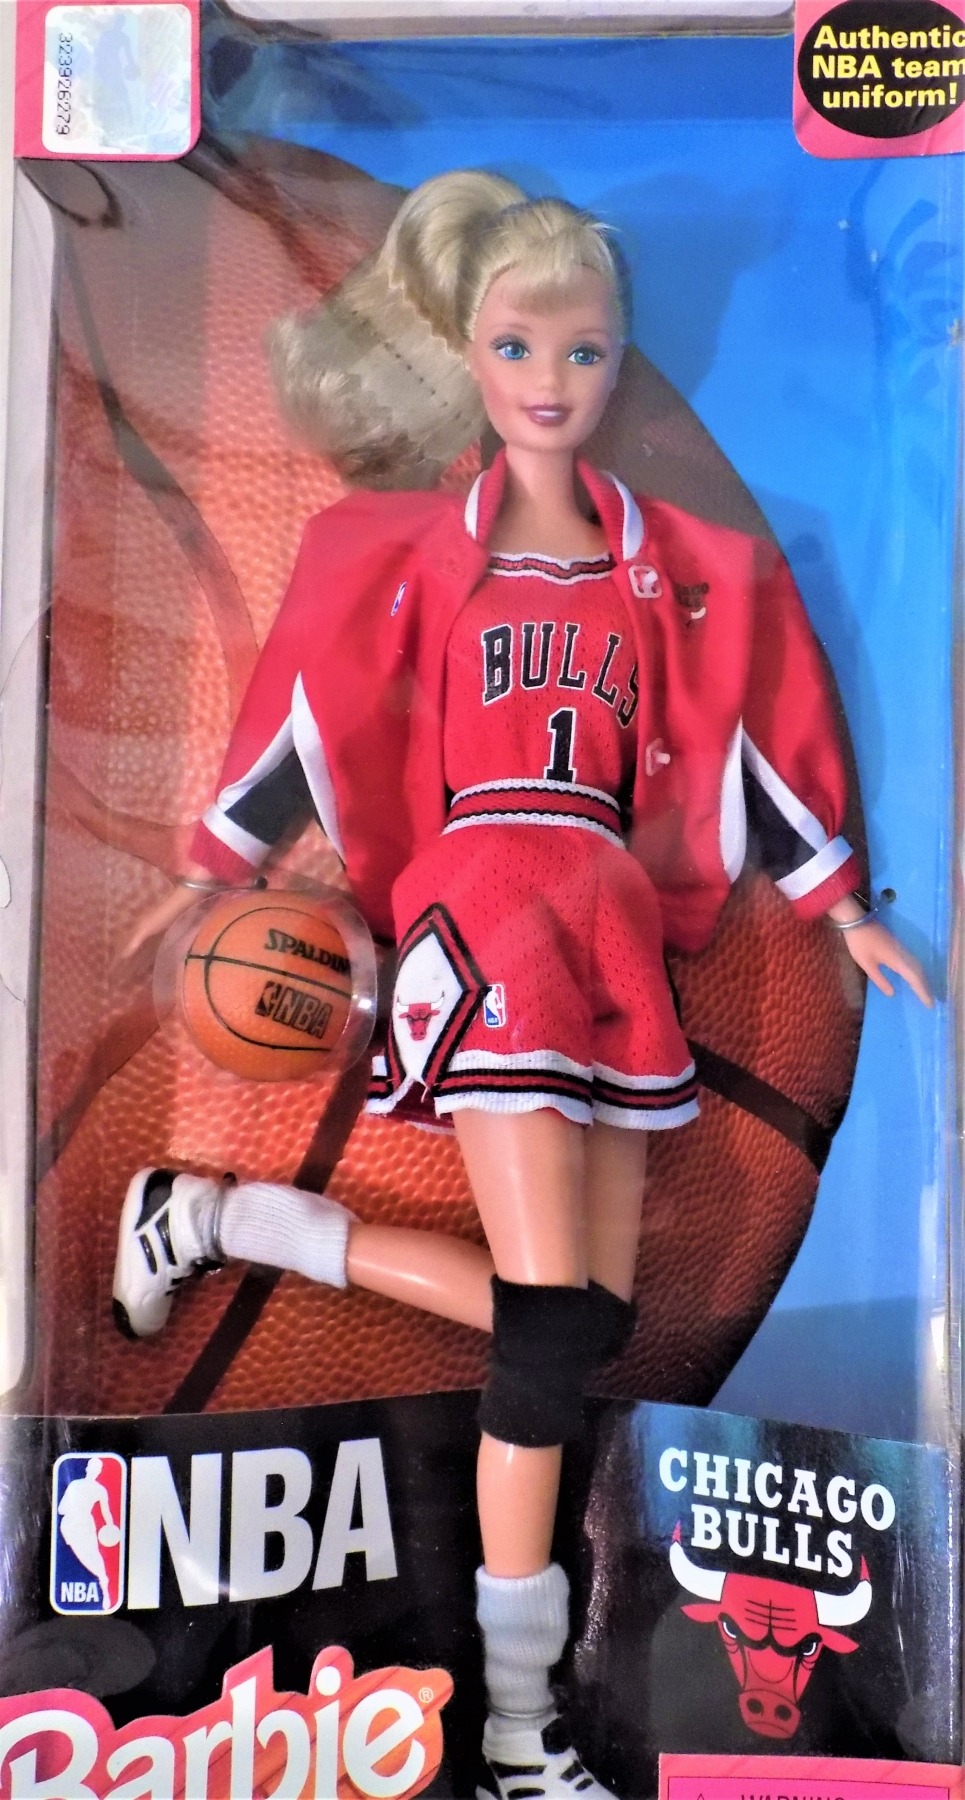 totaal span krab NBA (Chicago Bulls) Barbie - Timeless Treasures and Collectibles